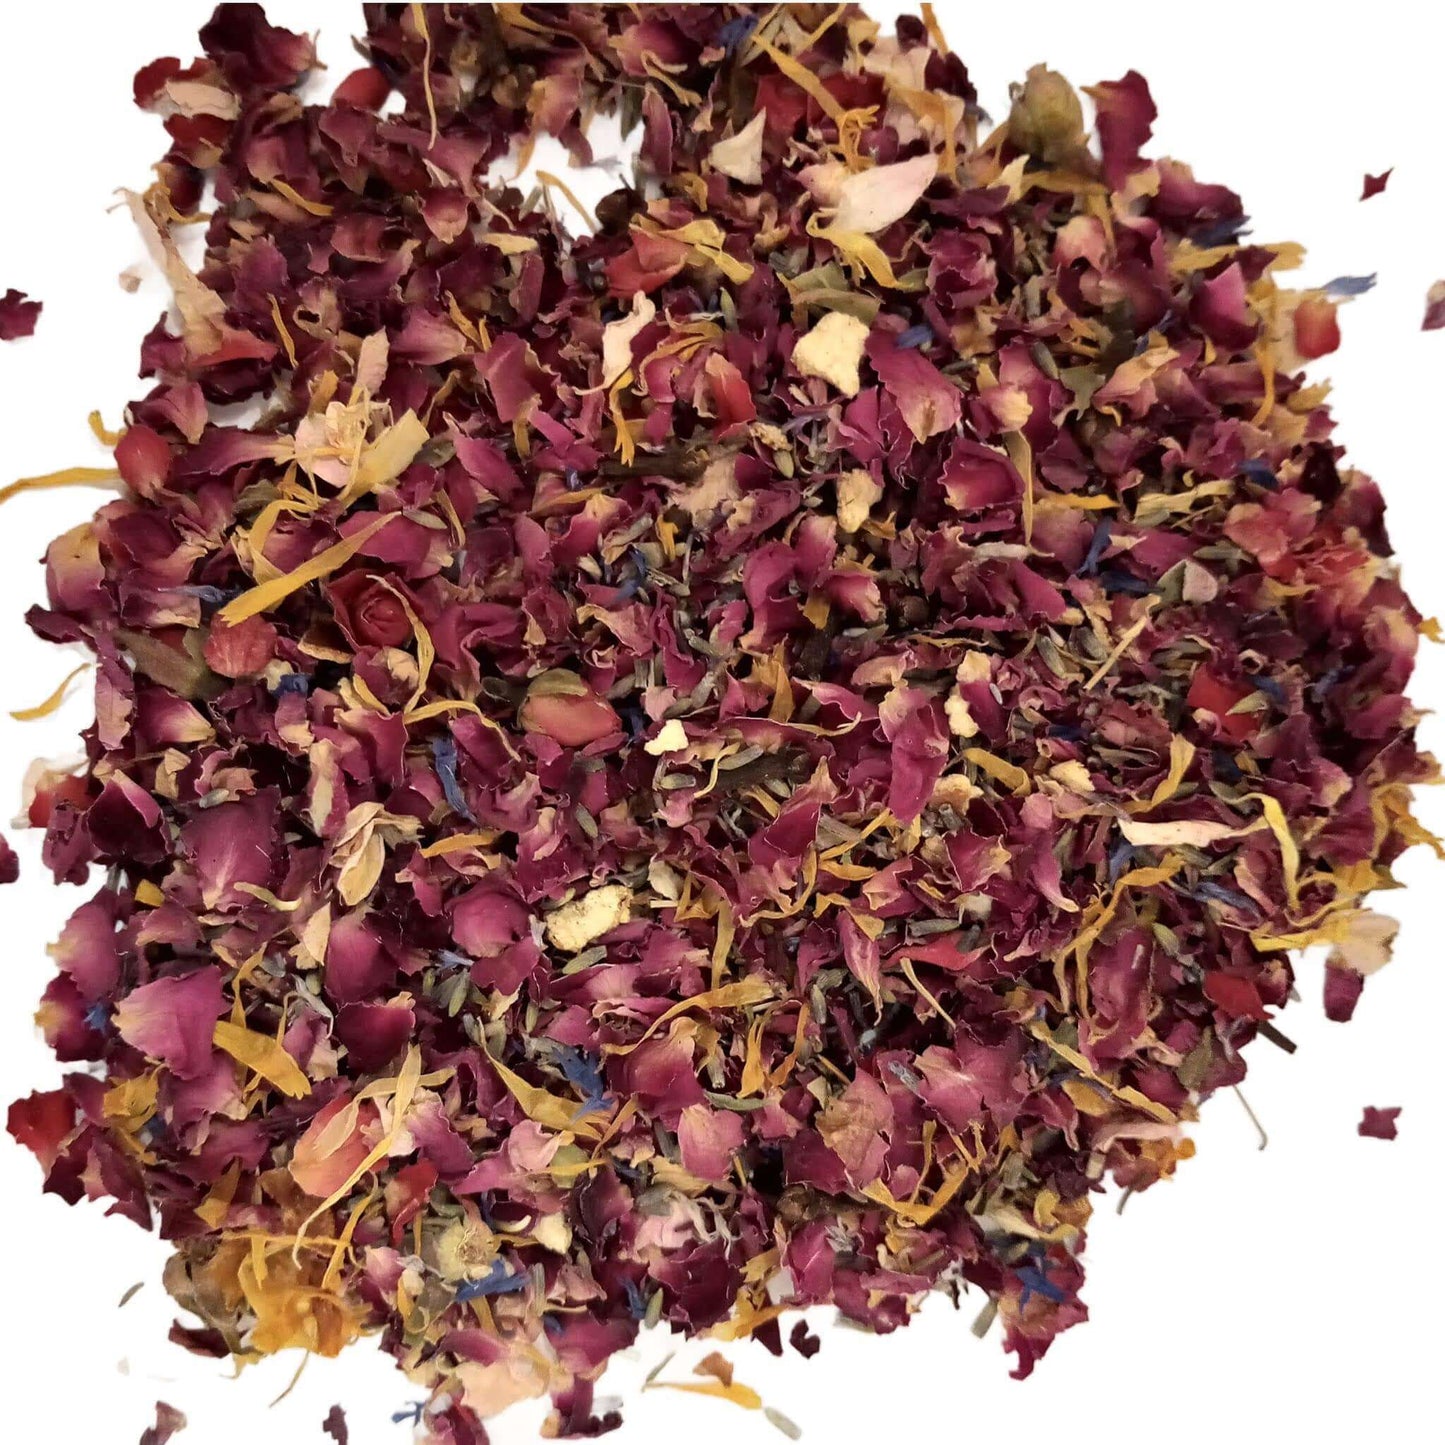 Experience the old-world charm of our Tudor Castle Wildcraft Medieval Botanical Potpourri.